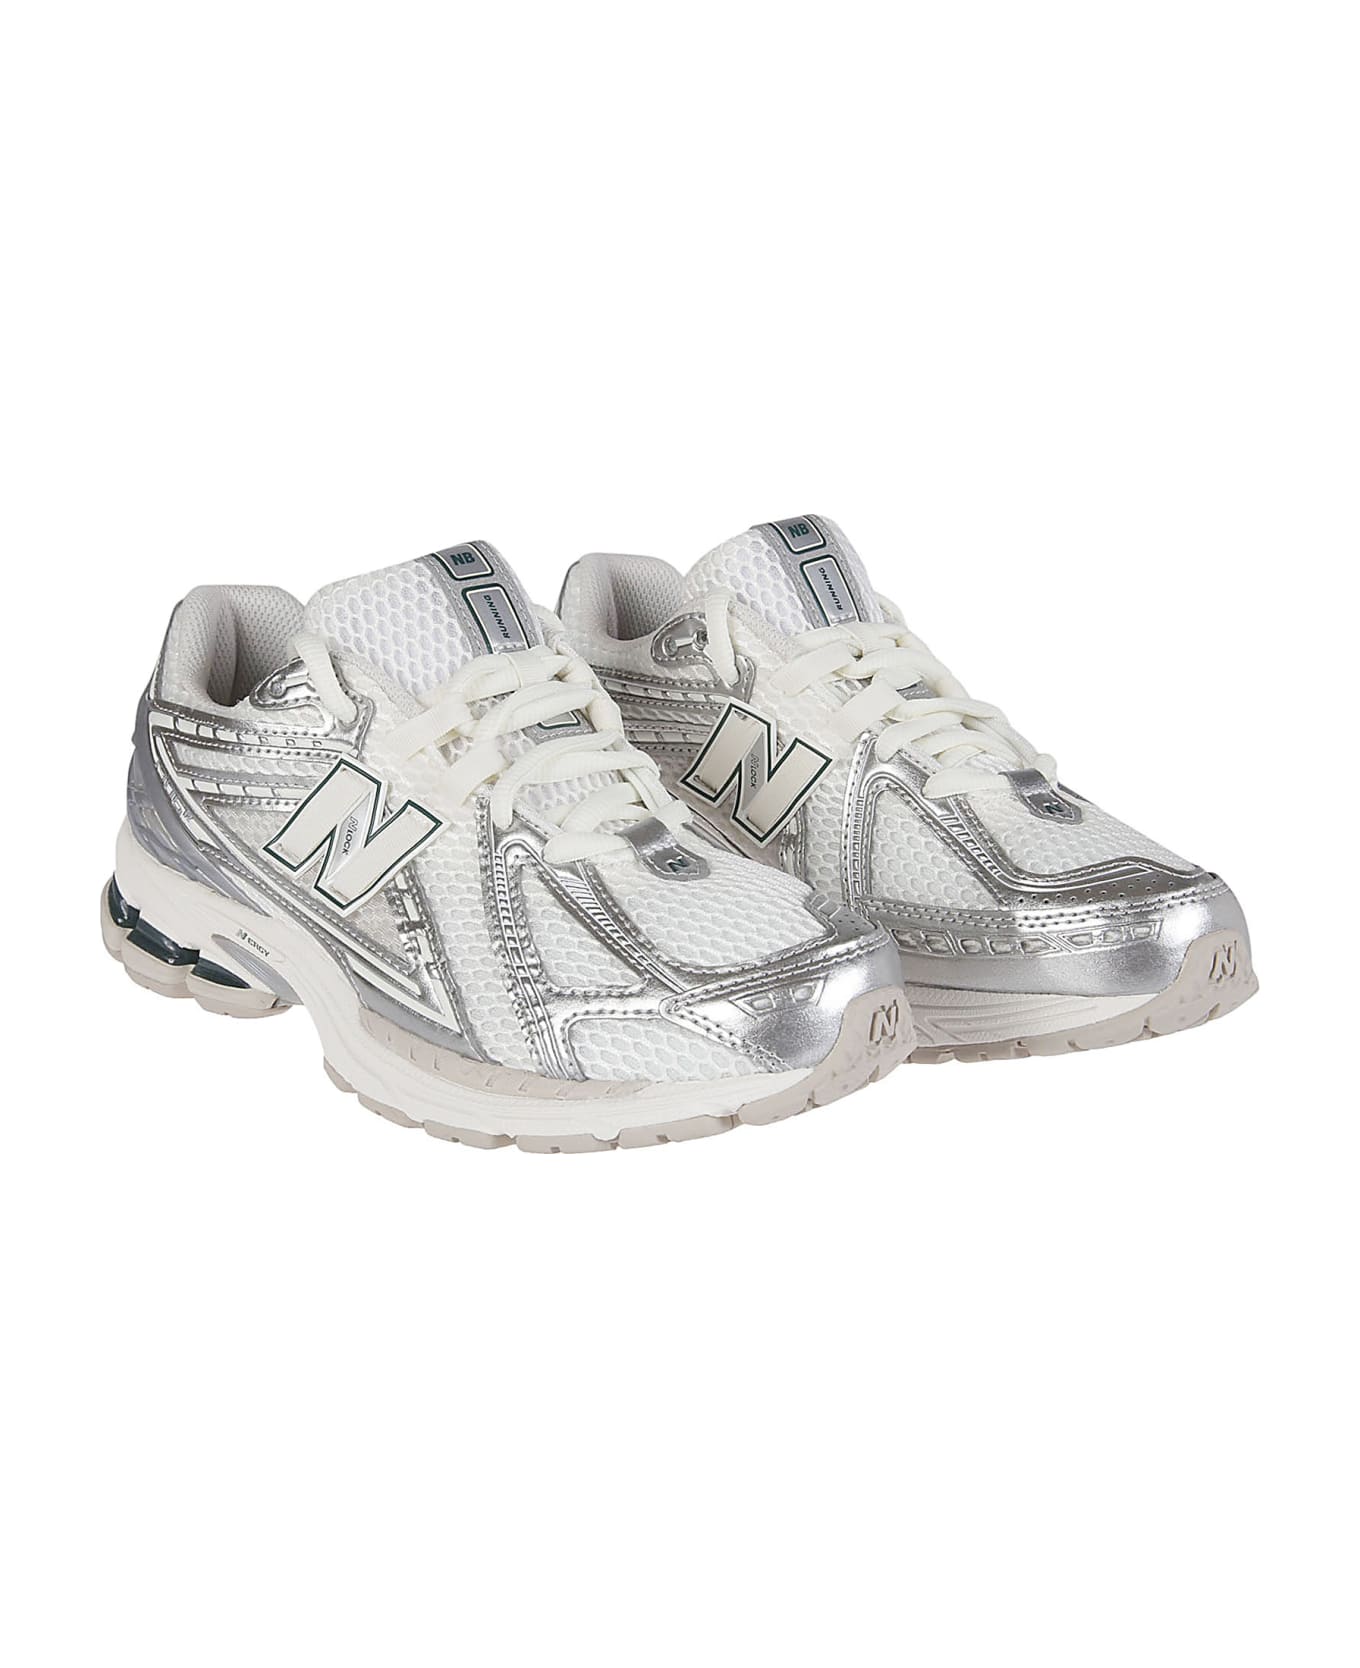 New Balance 1906 Sneakers - Silver Metallic/off White スニーカー